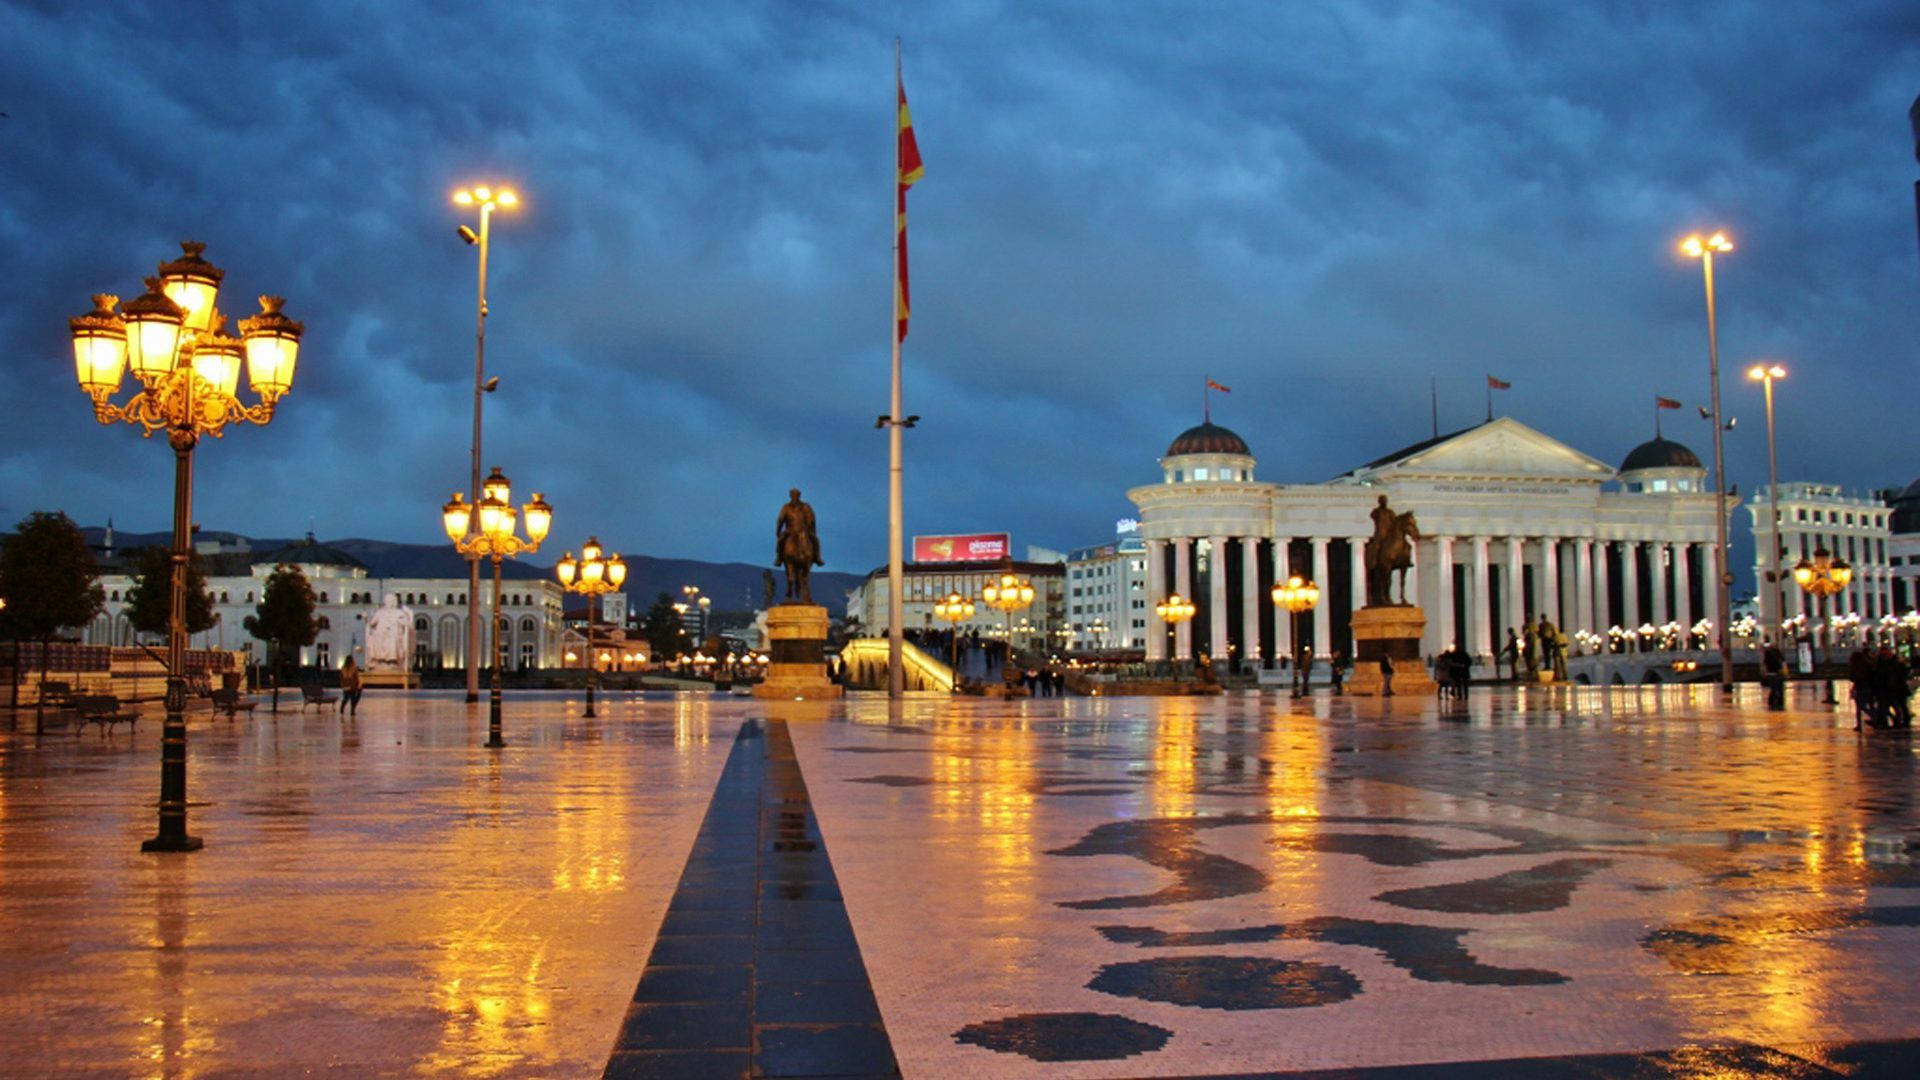 Macedonia Square At Night Picture